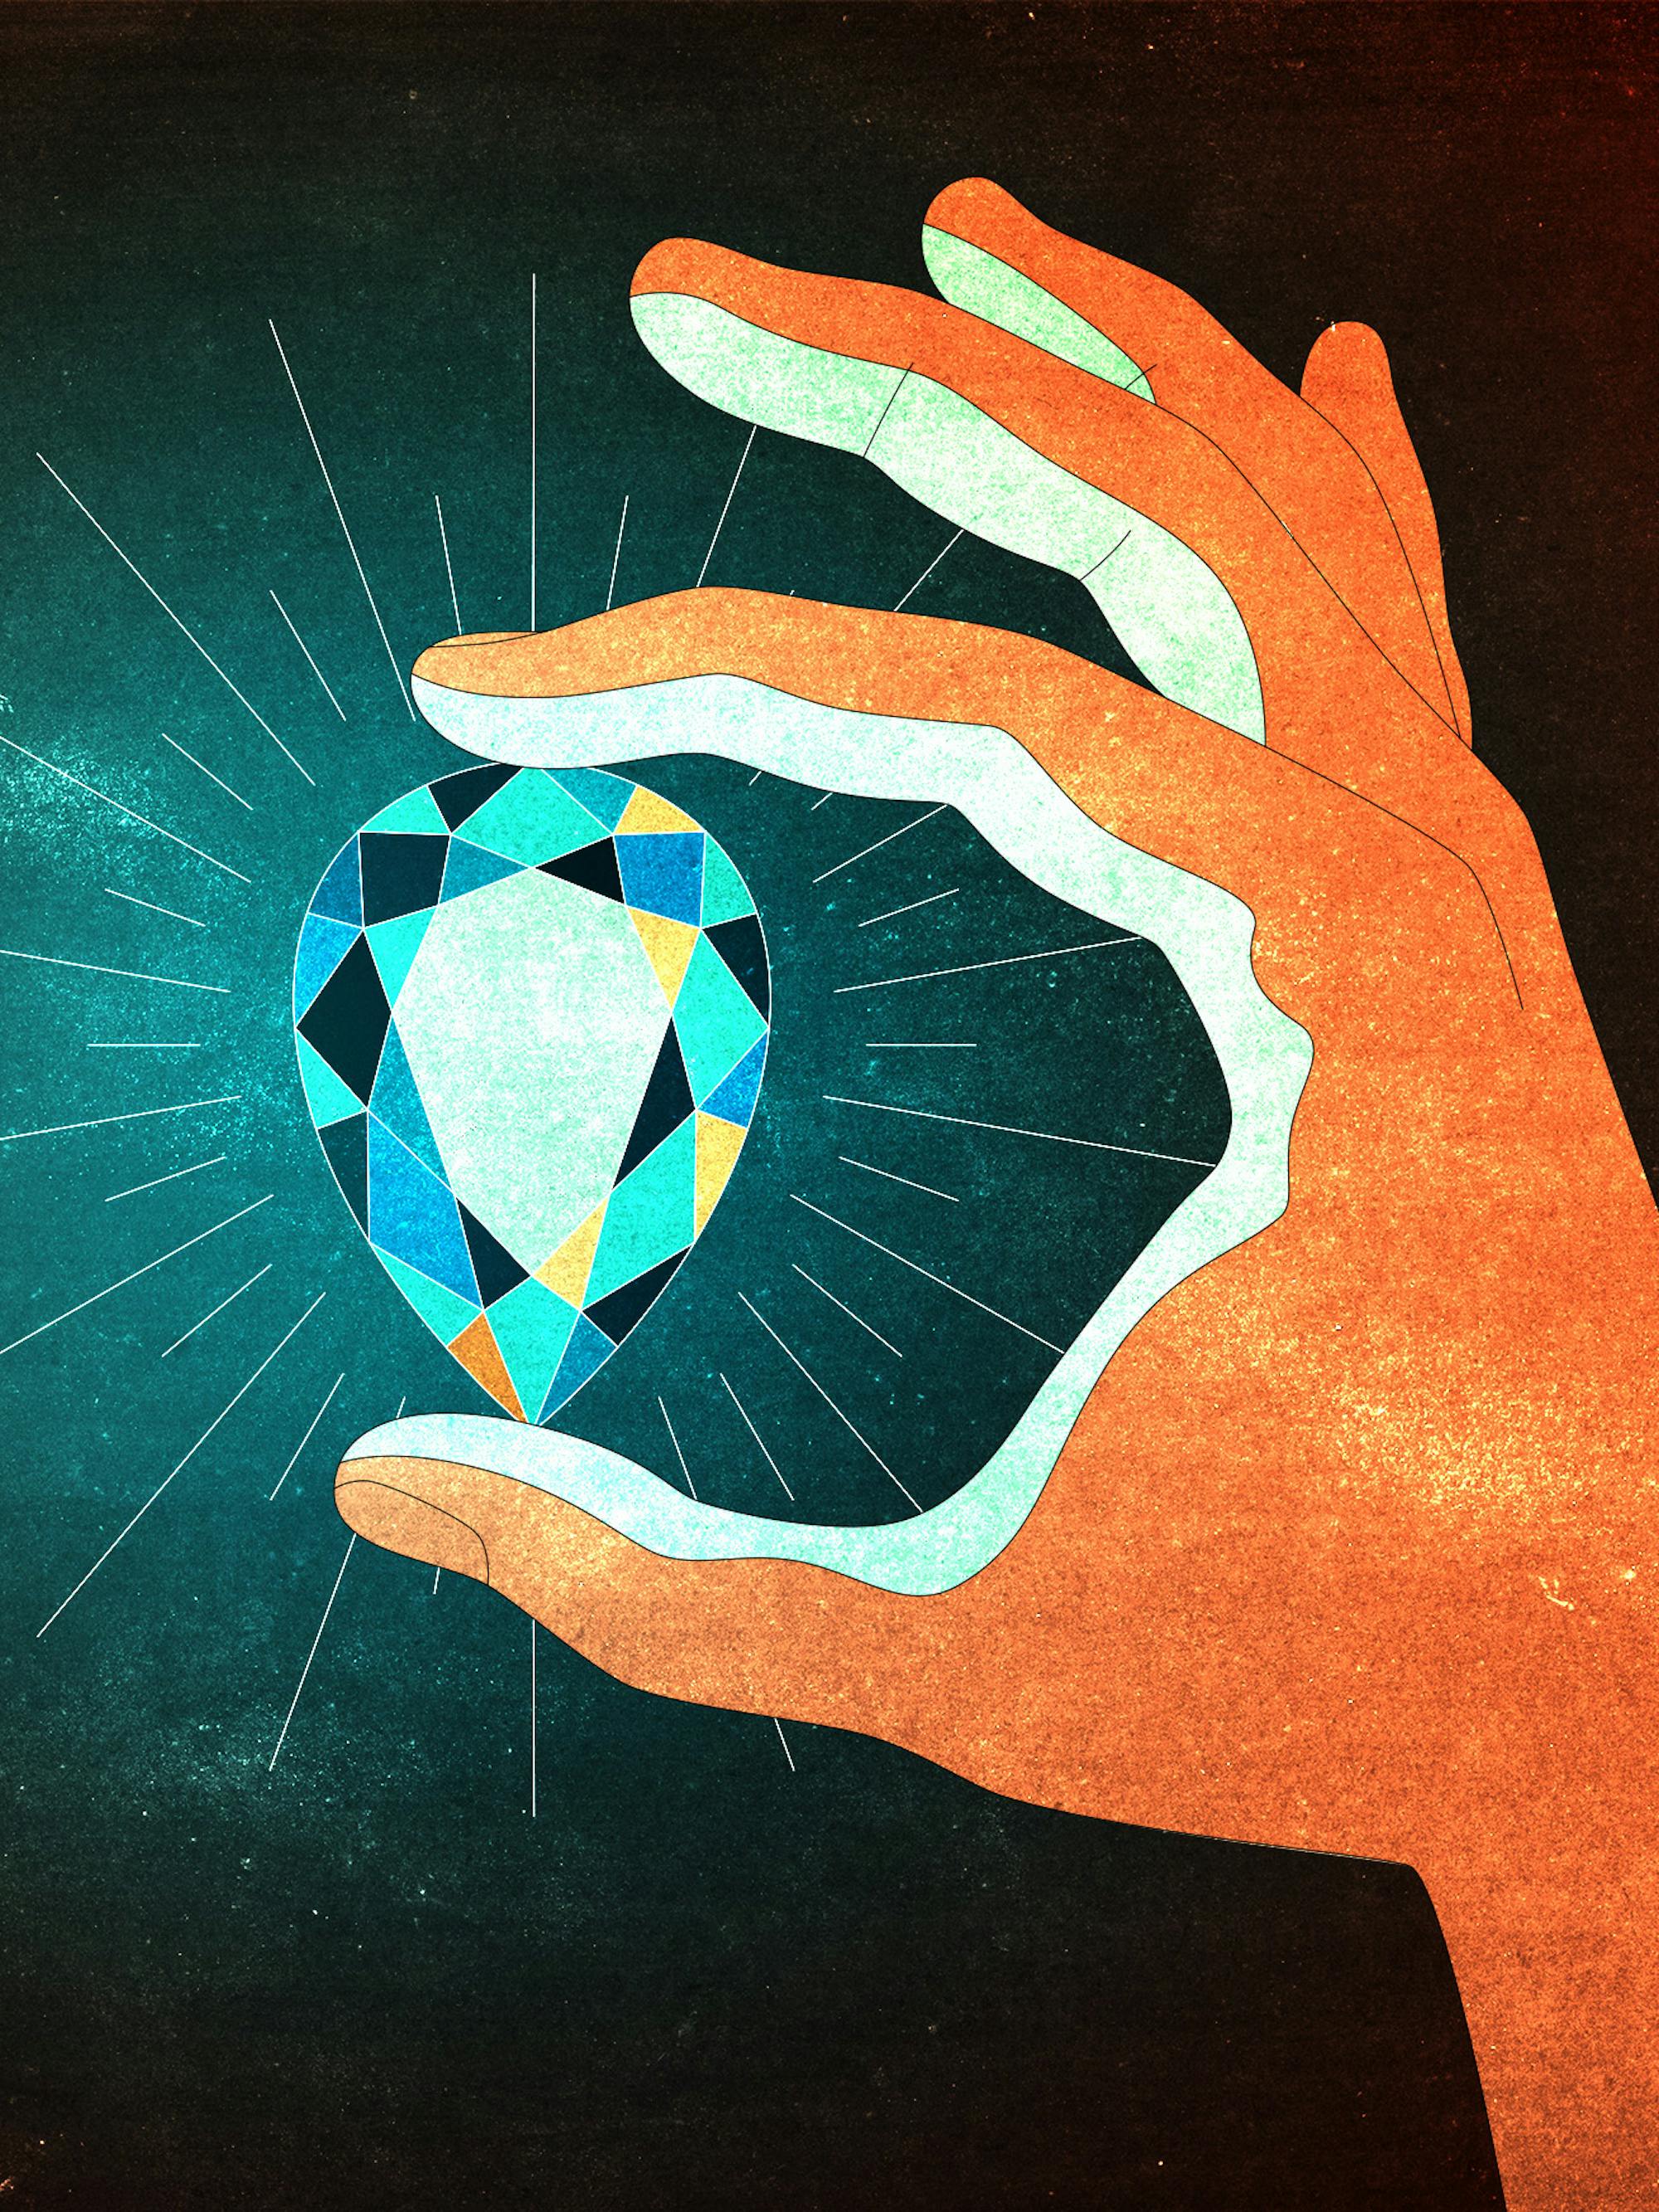 The Sea of Flames, a sought-after blue diamond, is held between a thumb and index finger.